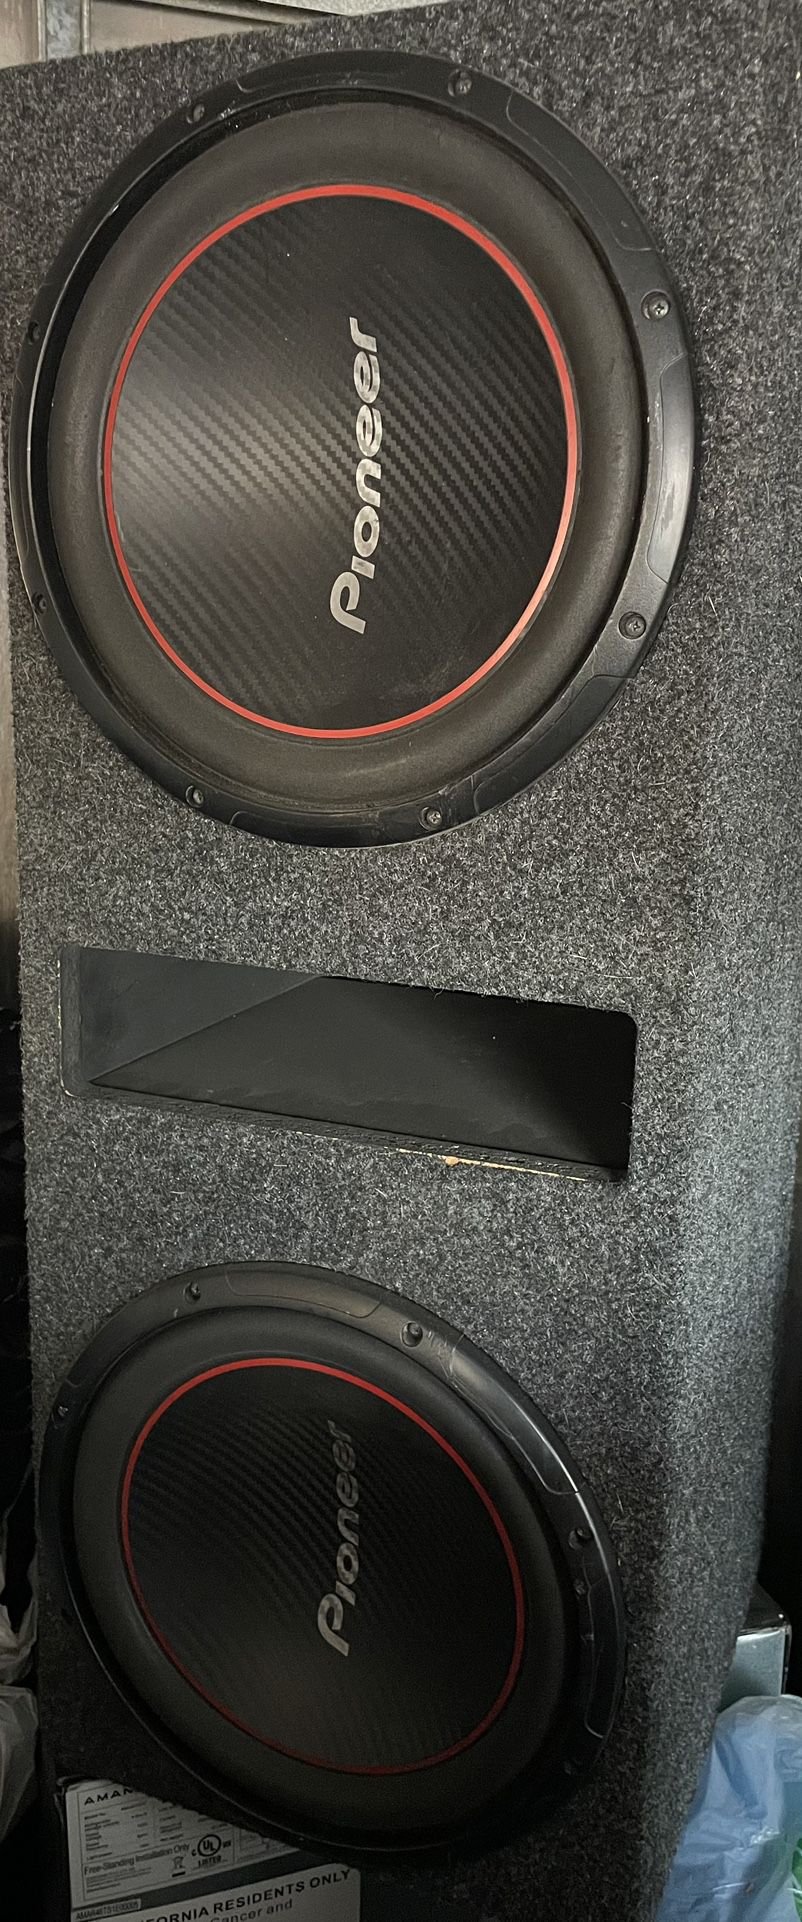 12”pioneers Subs And Rockville Amp For Car,, 12”PA Speakers 2400 Watts All For $500  OBO